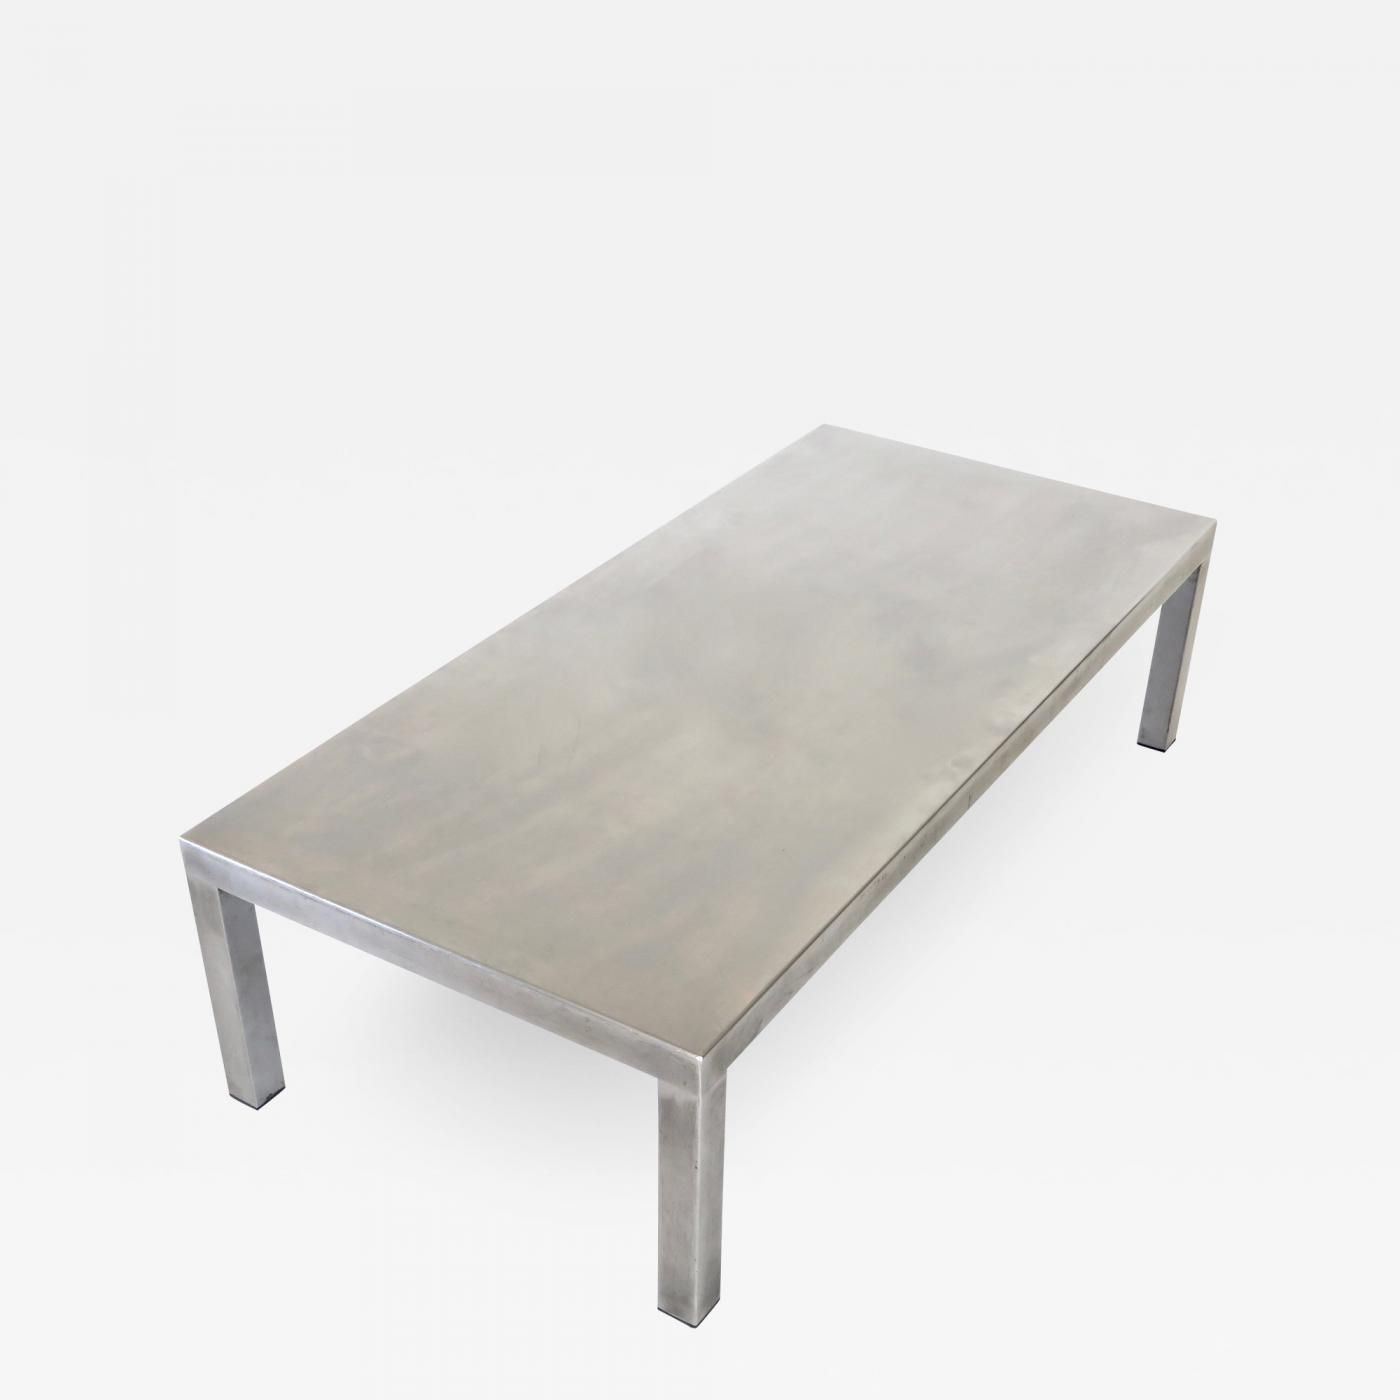 Maria Pergay – Maria Pergay Created With Marina Varenne Brushed Stainless  Steel Coffee Table With Brushed Stainless Steel Coffee Tables (View 2 of 15)